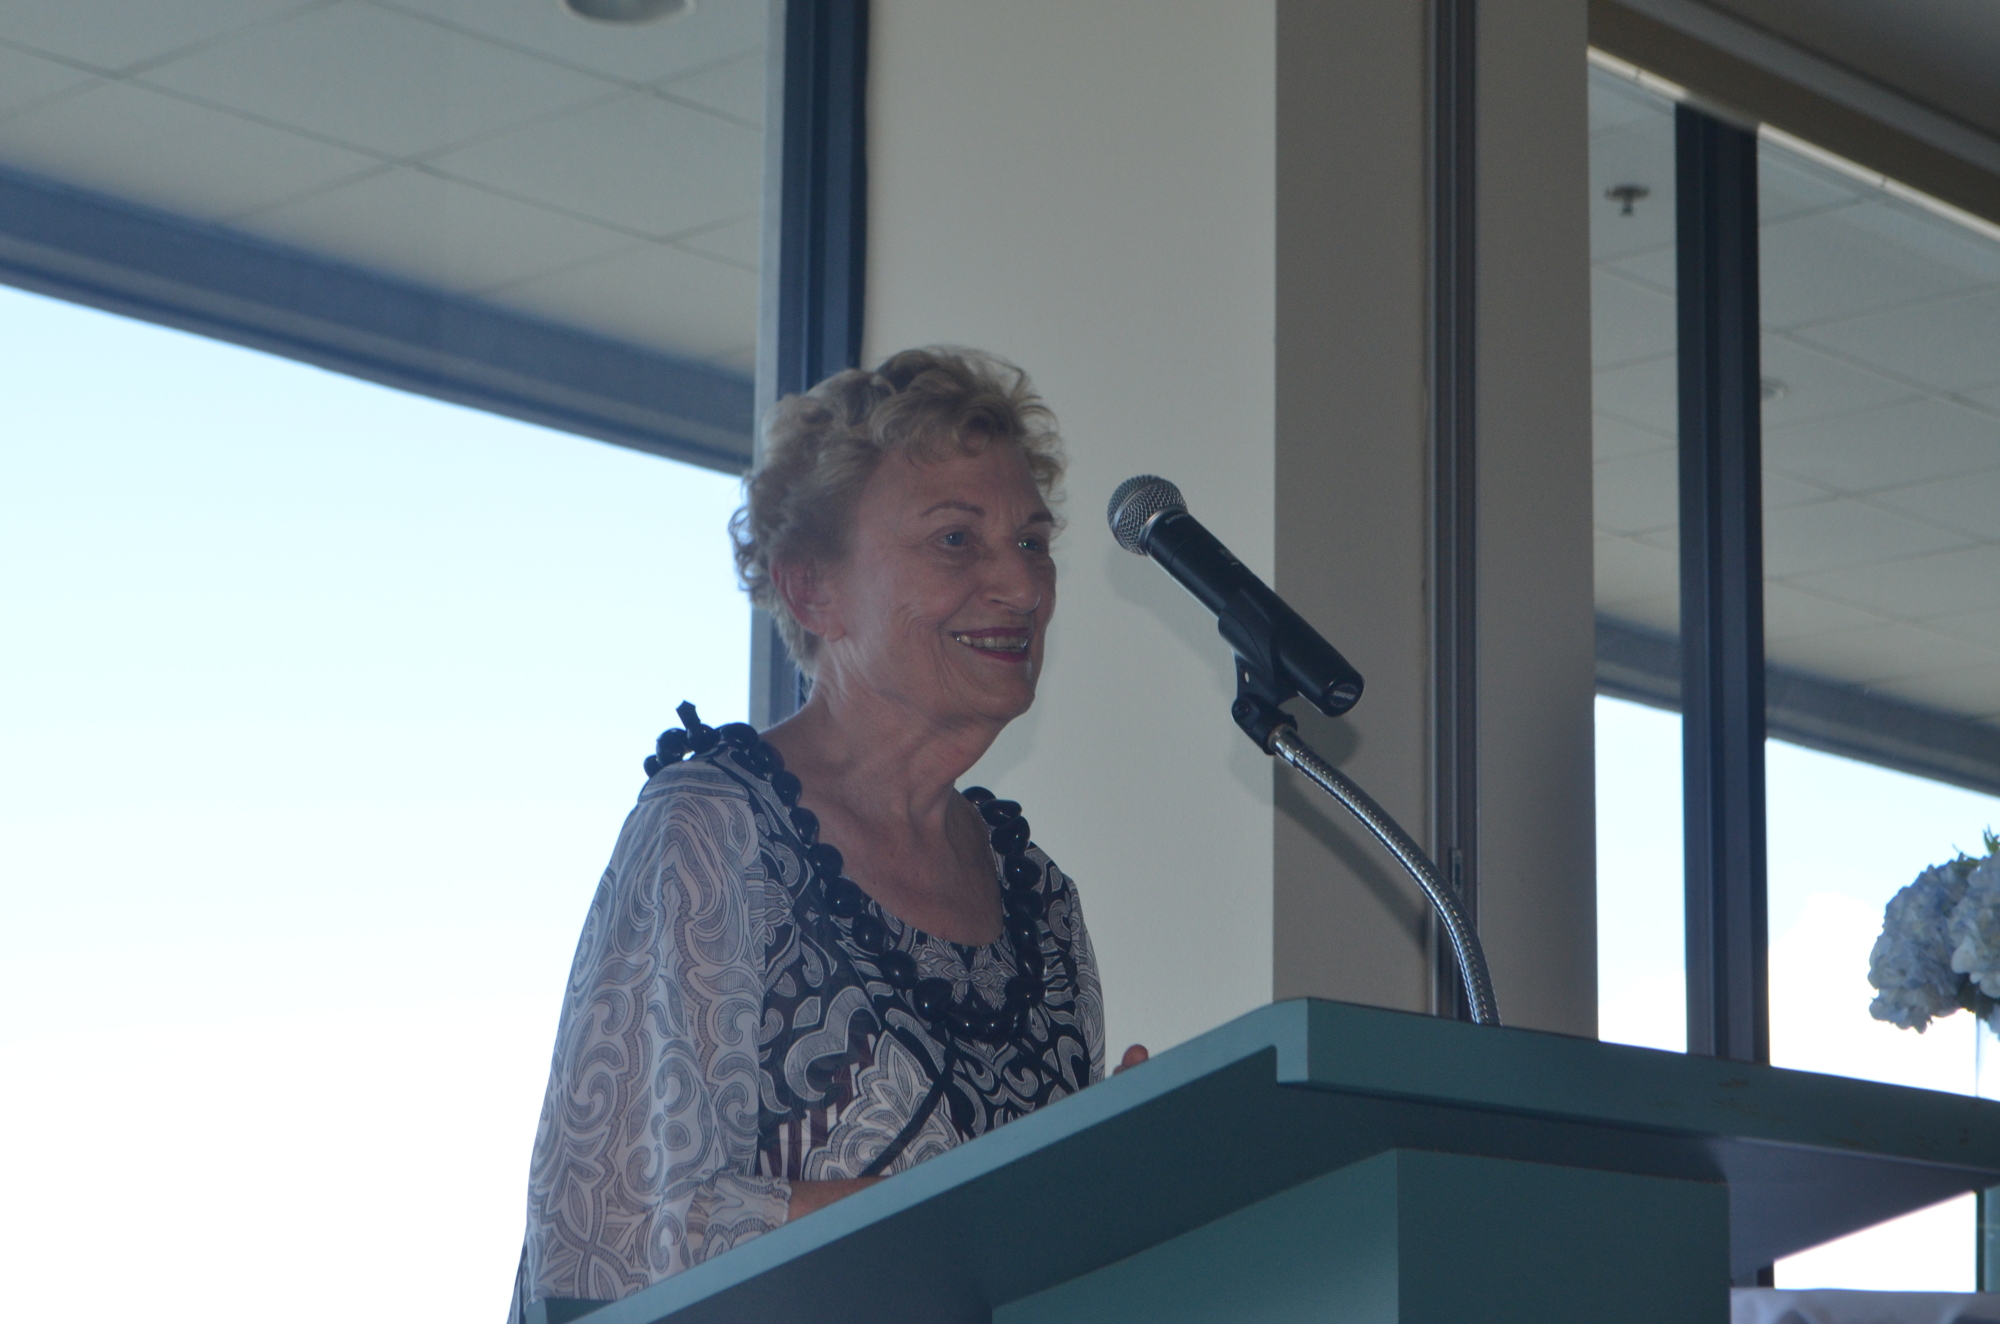 Johnson's younger sister, Eileen, spoke at his celebration of life on Oct. 2. At the end of her speech, she thanked Johnson for being her brother.